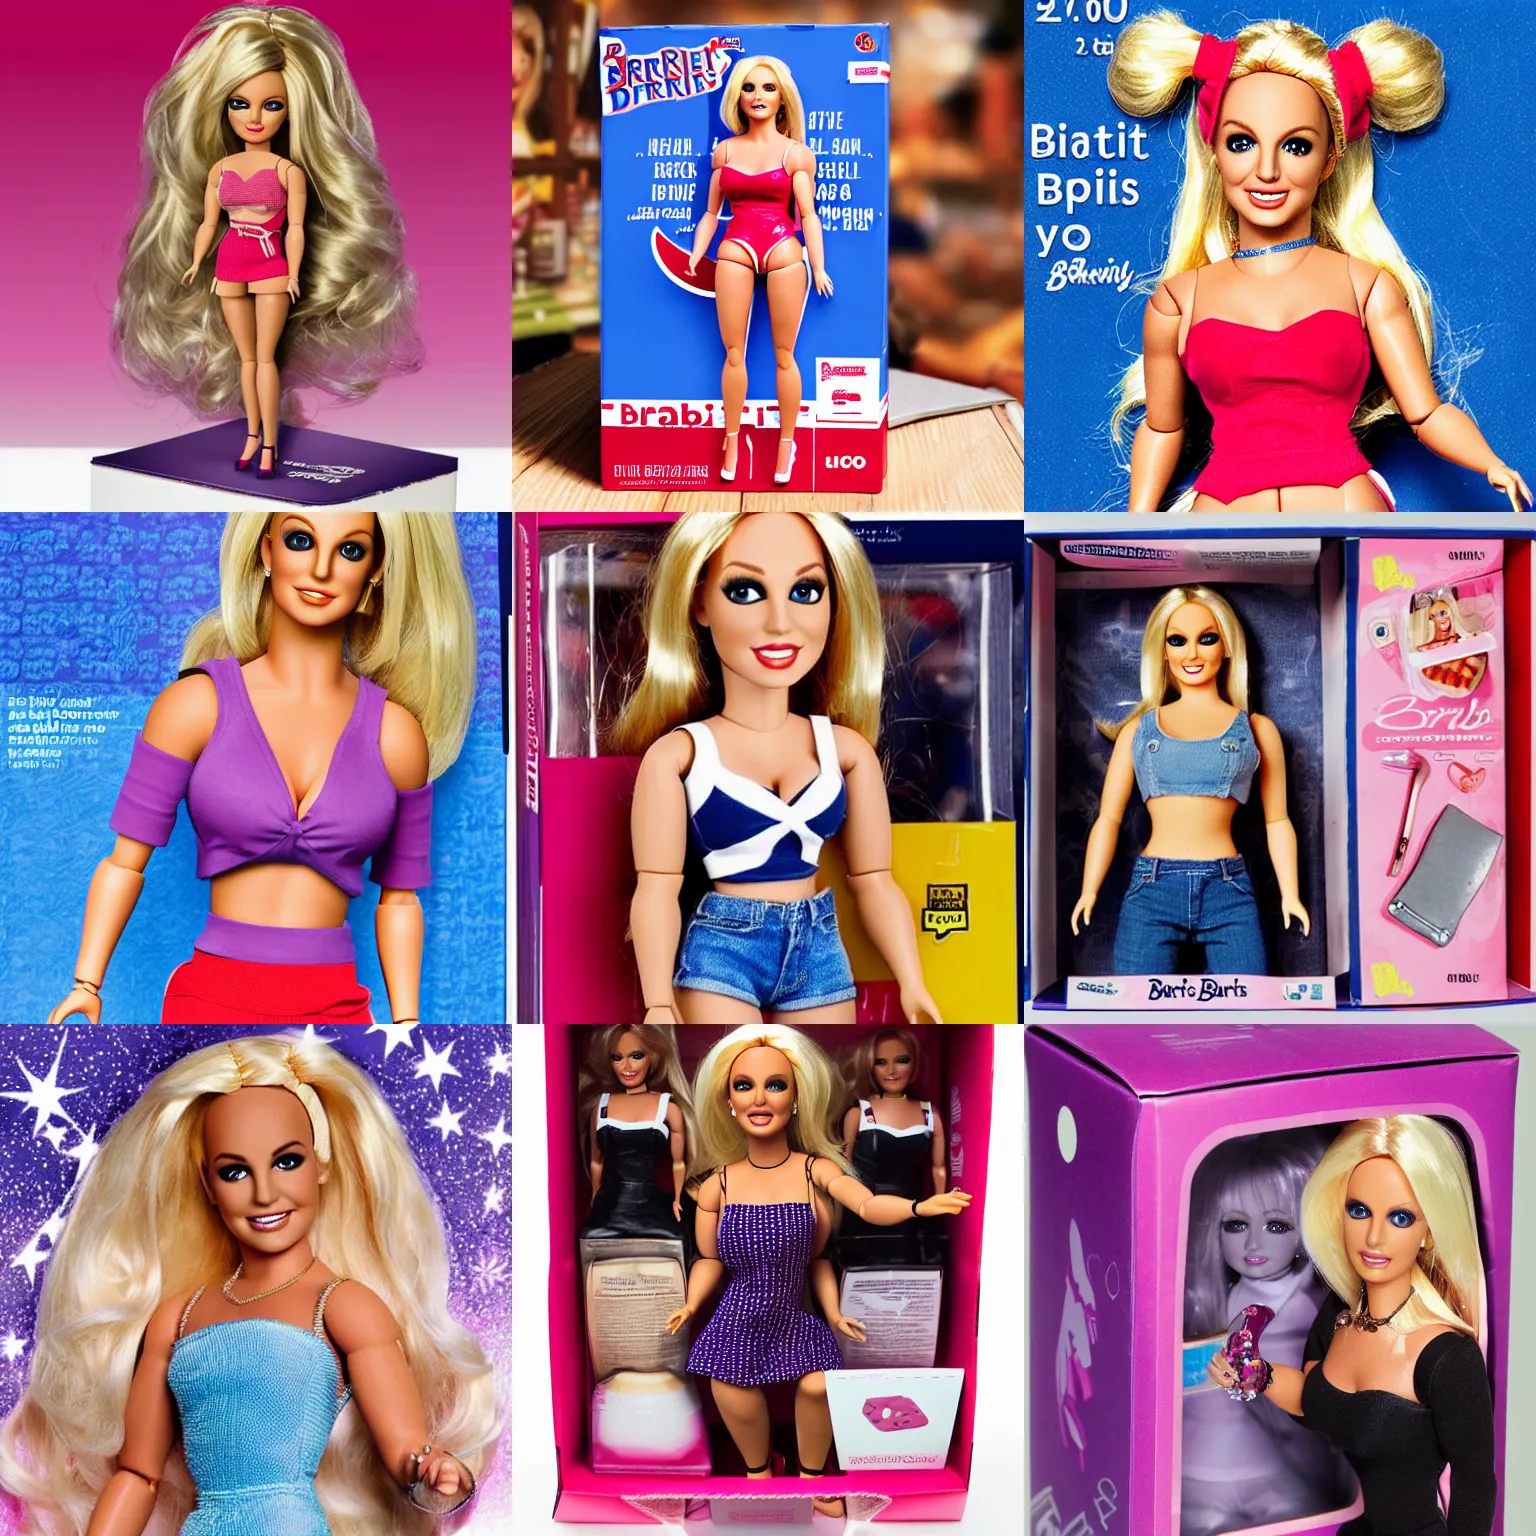 Prompt: a barby doll of Britney Spears in a box advertisement